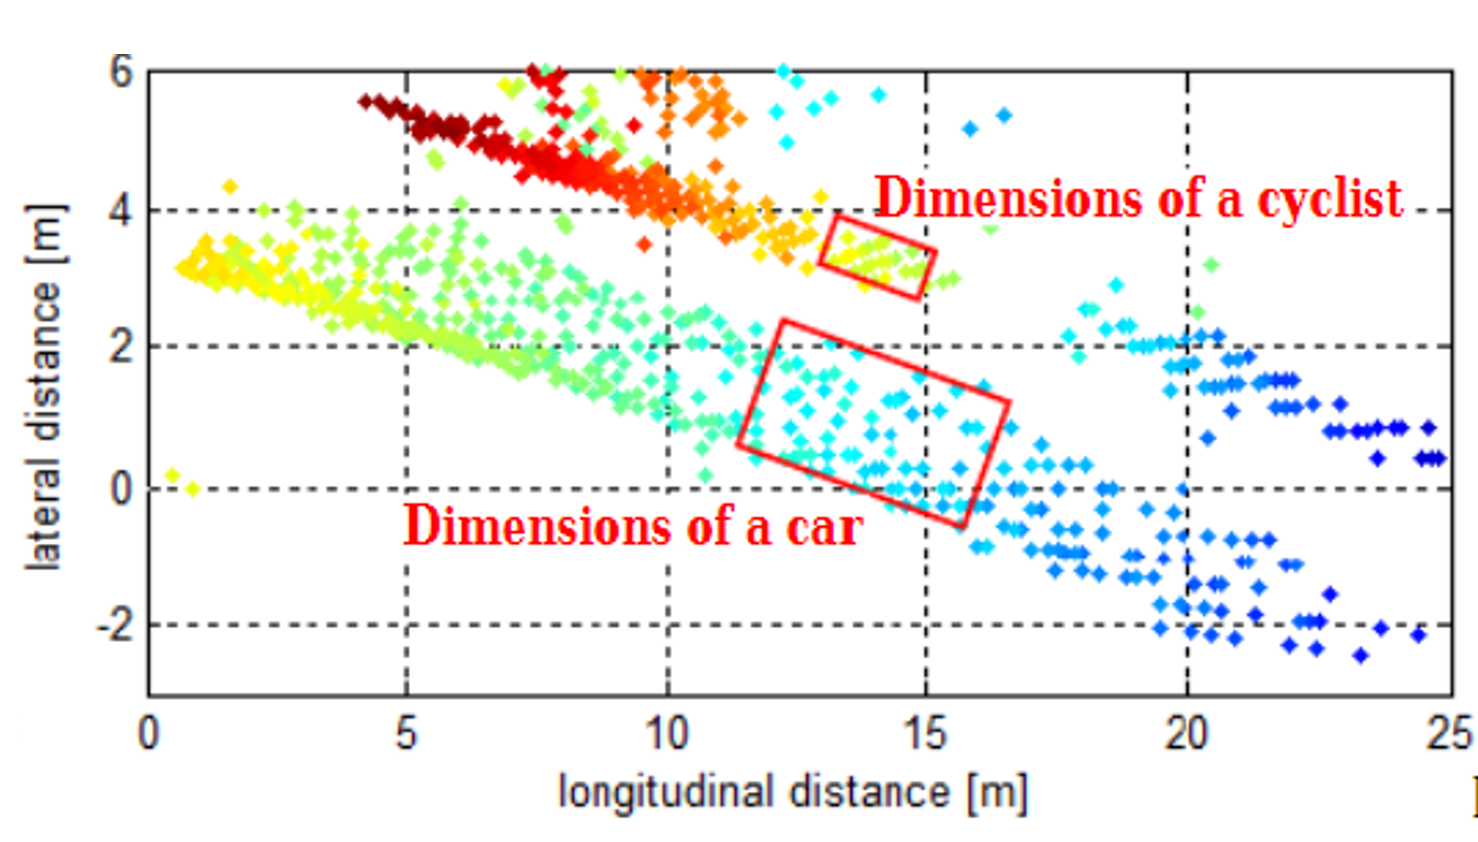 Clustering of a car and bicycle

source : https://ieeexplore.ieee.org/document/7226315